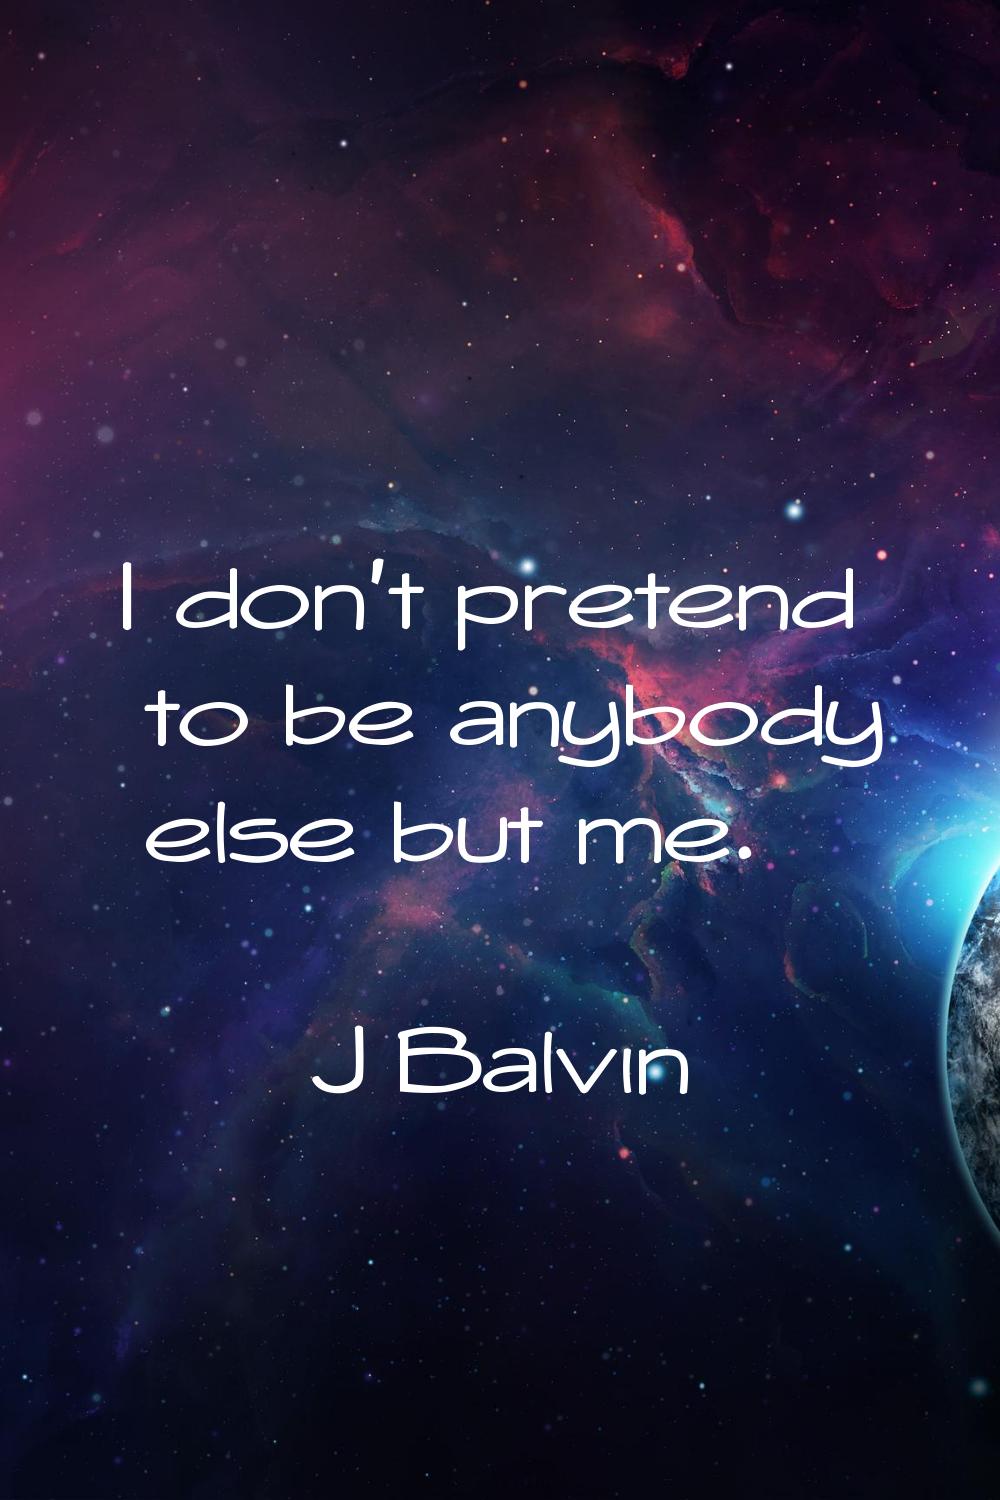 I don't pretend to be anybody else but me.